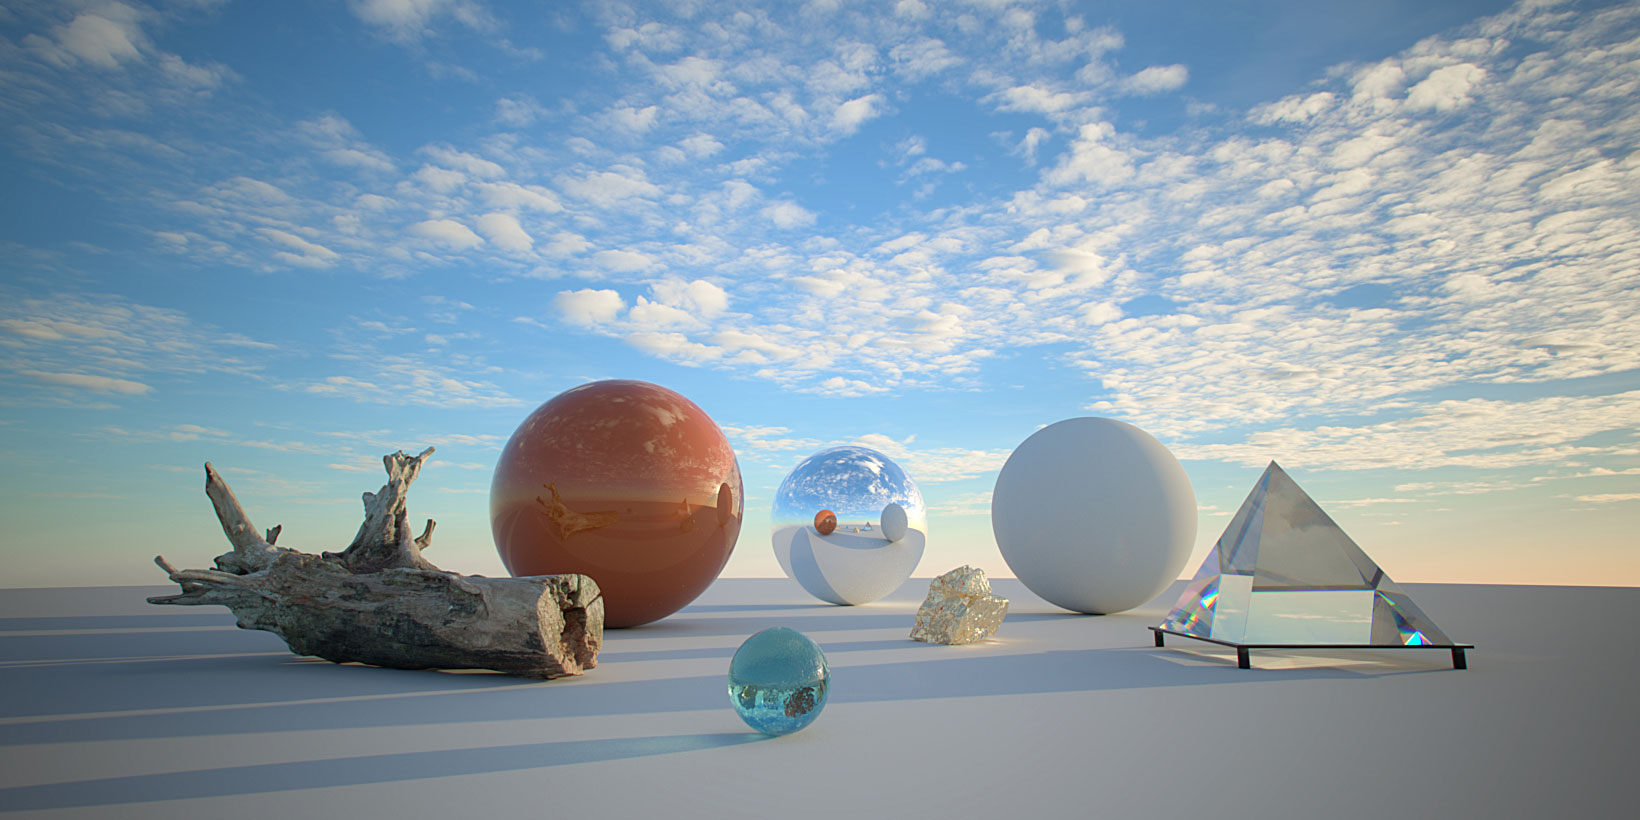 CG HDRI / Winter Collection Skies 02 from helloluxx